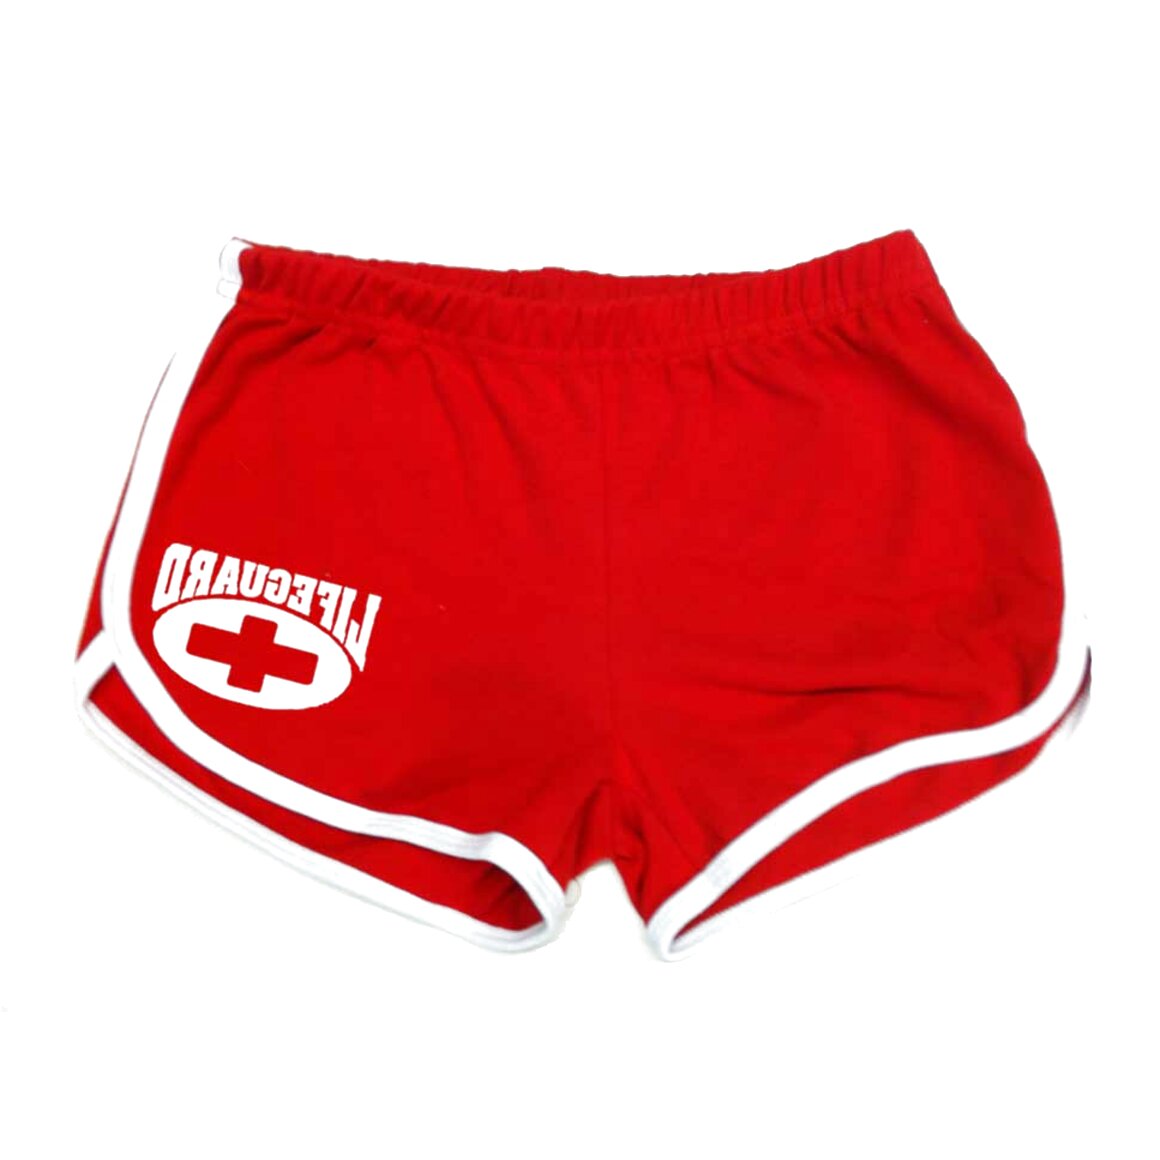 Lifeguard Shorts for sale in UK | 58 used Lifeguard Shorts